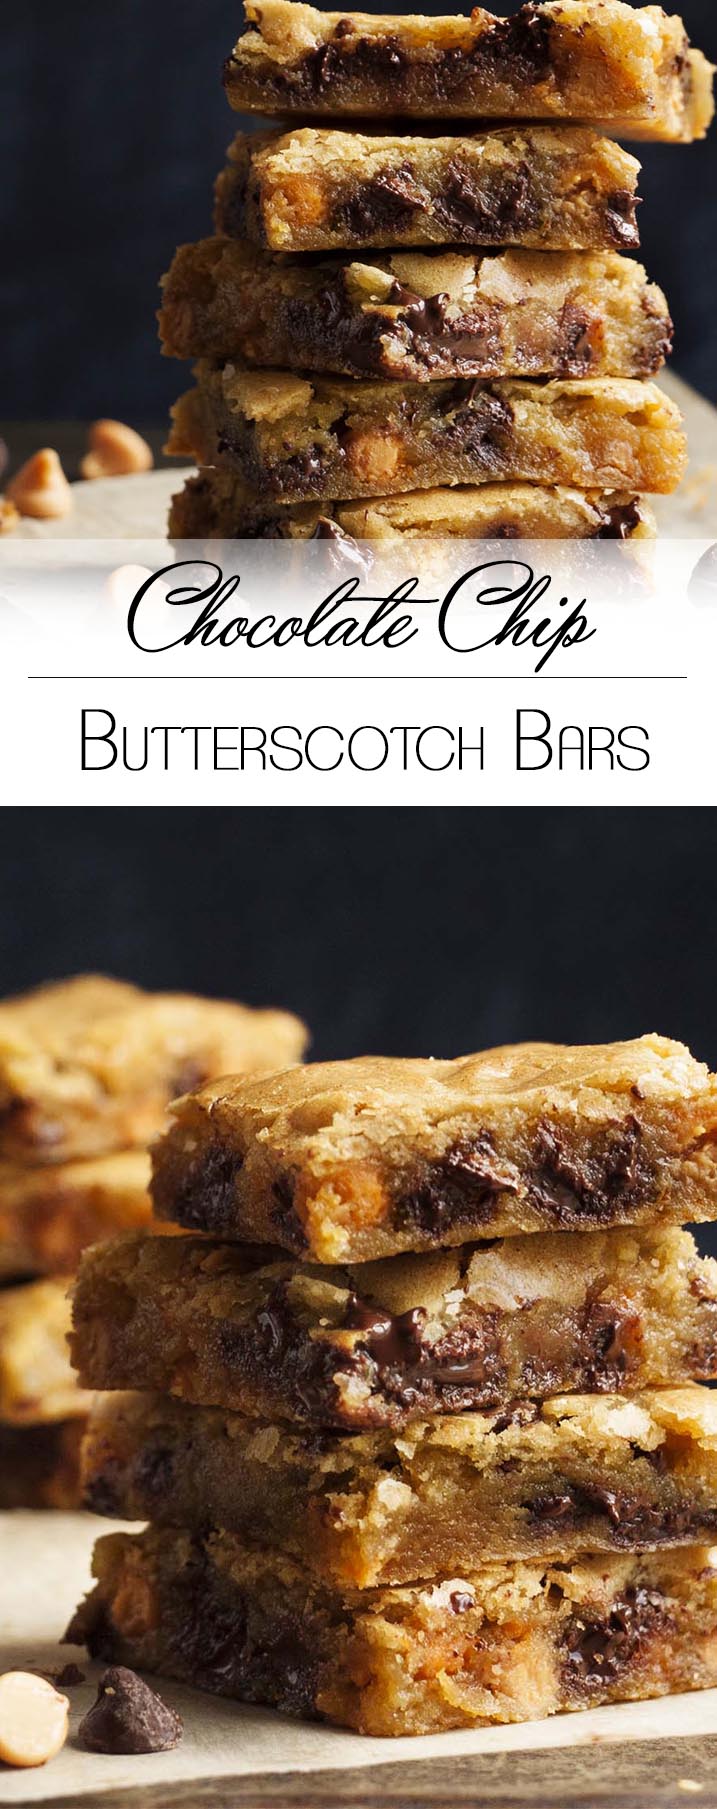 Chocolate Chip Butterscotch Bars - These one bowl bars have all the comfort of an old-fashioned butterscotch bar and the added pleasure of gooey chocolate chips in every bite. | justalittlebitofbacon.com